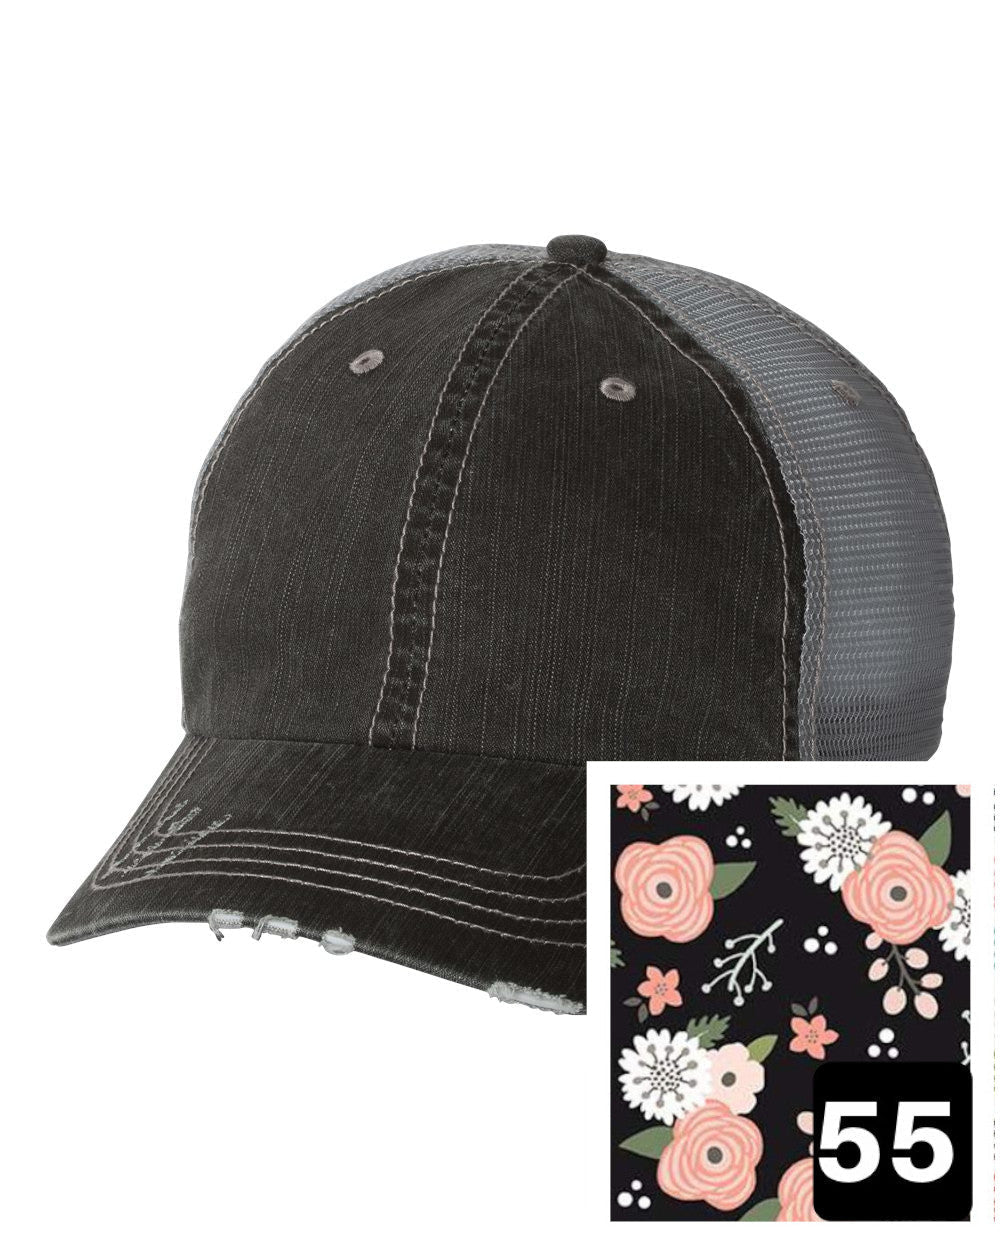 gray distressed trucker hat with petite floral on navy fabric state of Kansas